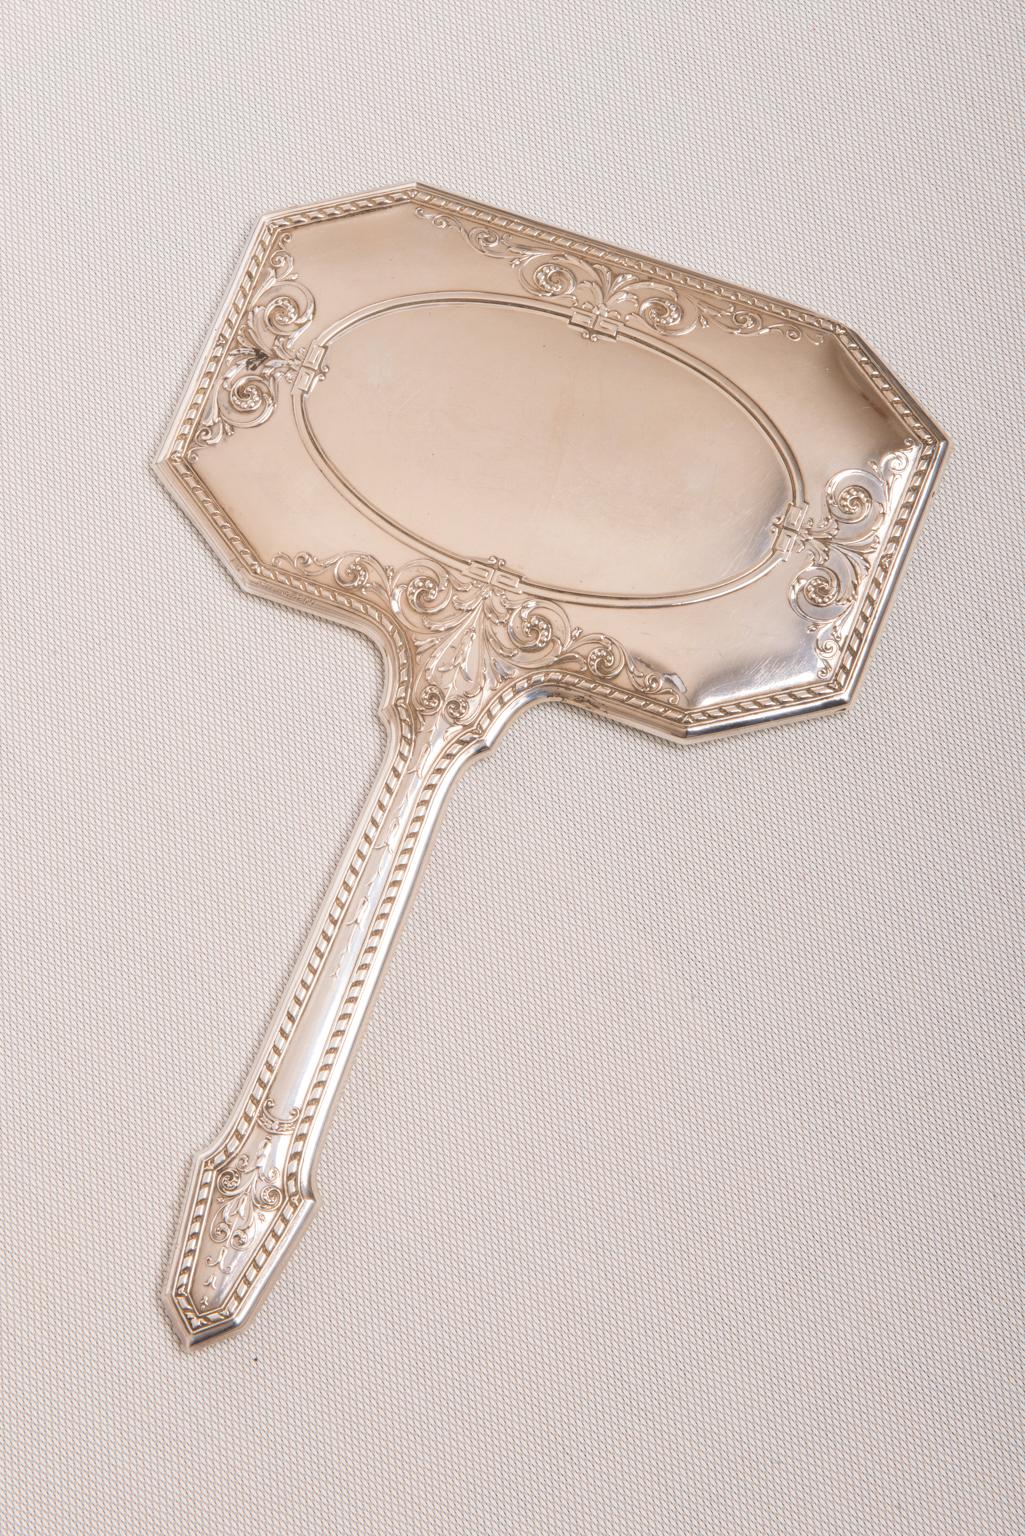 Unusual sterling silver mirror with handle, elegant and practical.
What better gift for a woman ?
